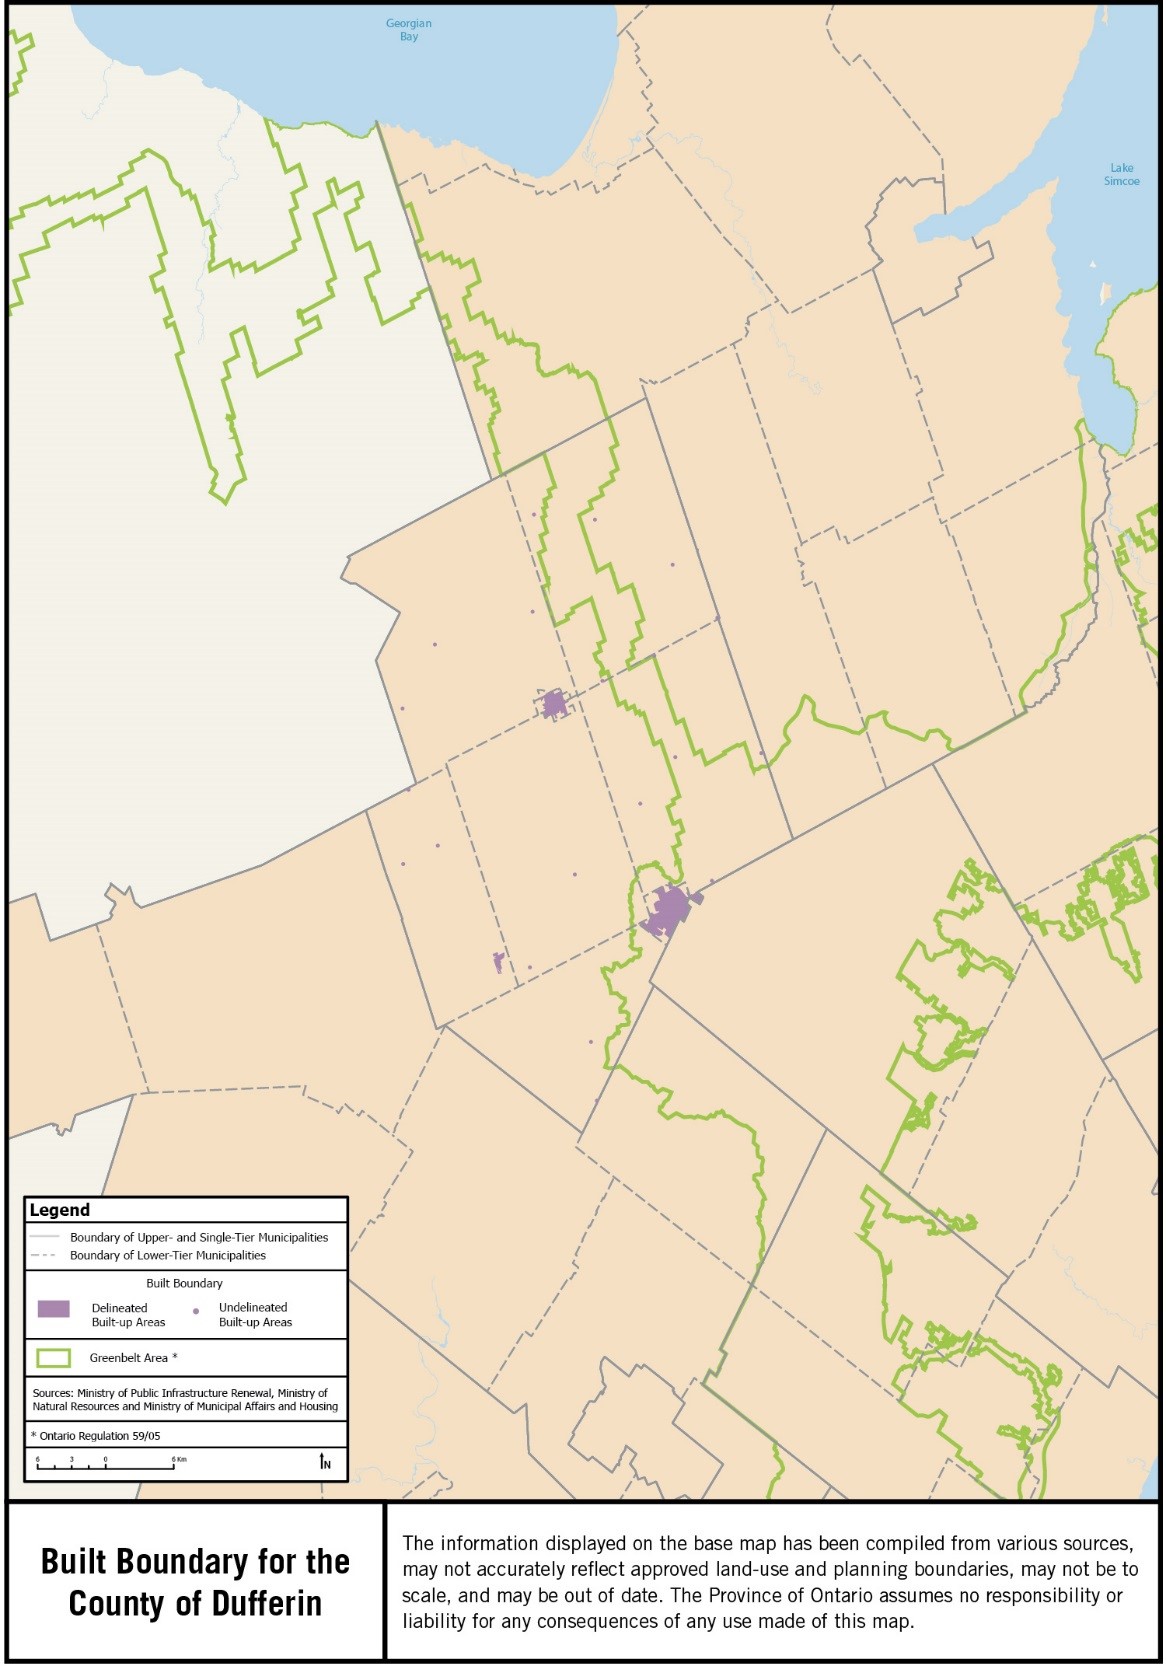 Map showing the built boundary for the County of Dufferin.